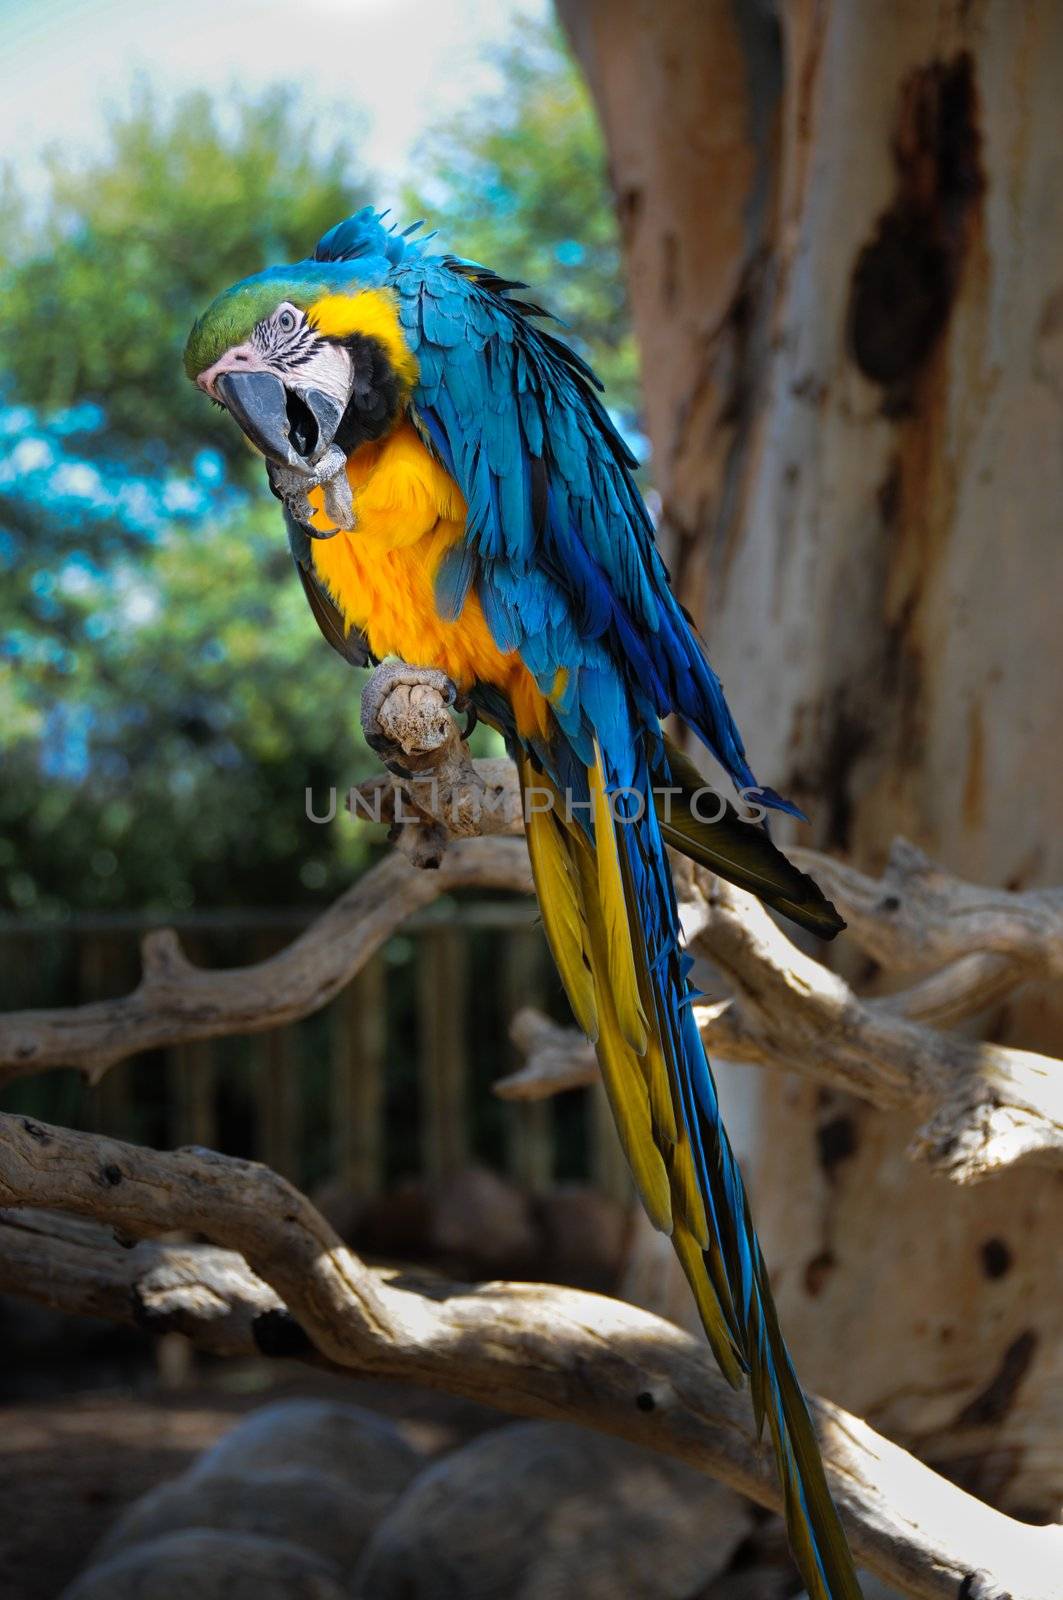 Curious blue-and-yellow macaw, Ara parrot (Psittacidae)